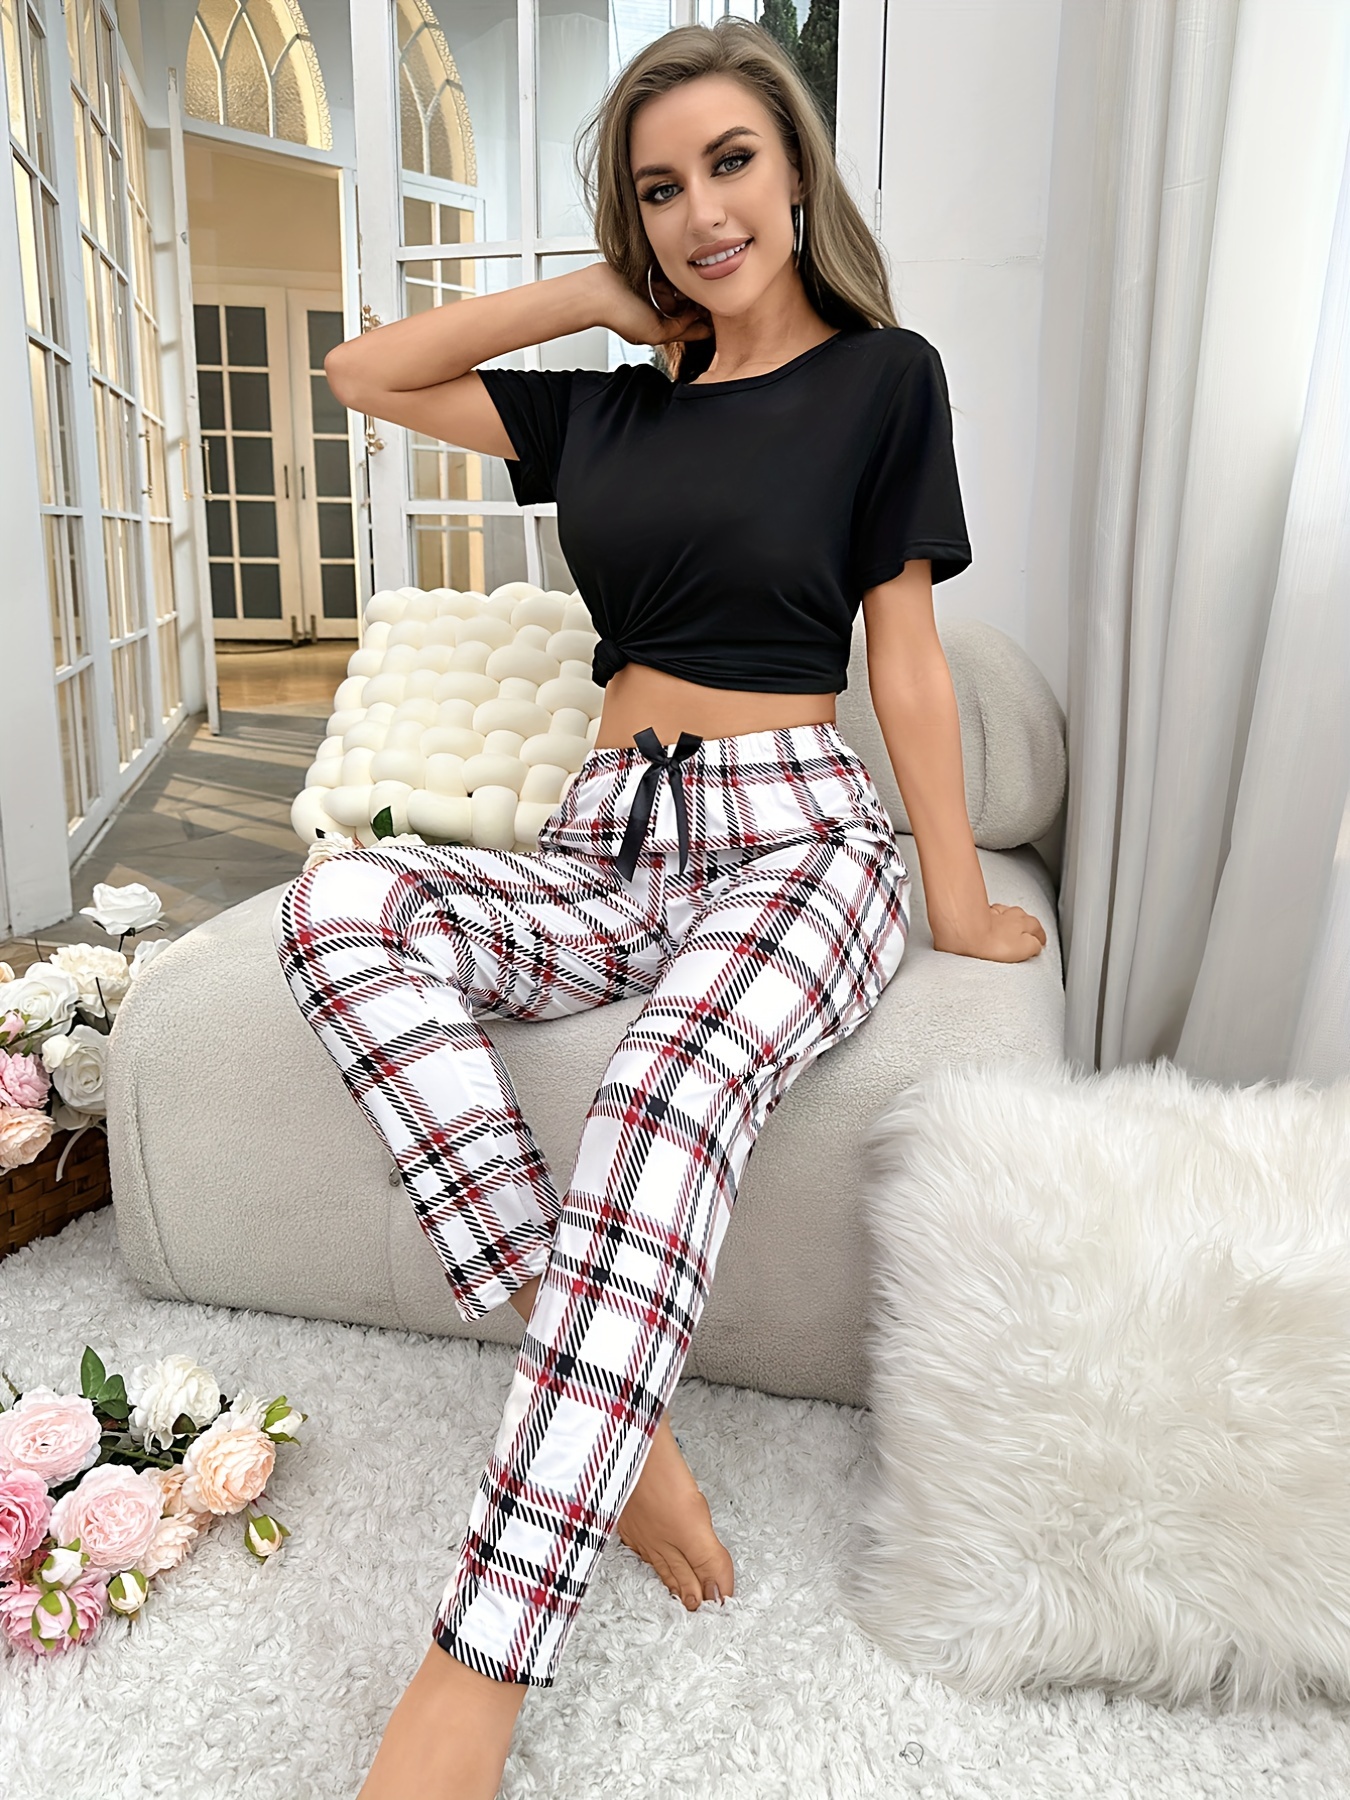 Soft Plaid 5XL Pajama Set For Women Short Sleeve Top And Long Pajama Pants  Women Perfect For Summer Home Wear LJ200822 From Luo03, $17.51